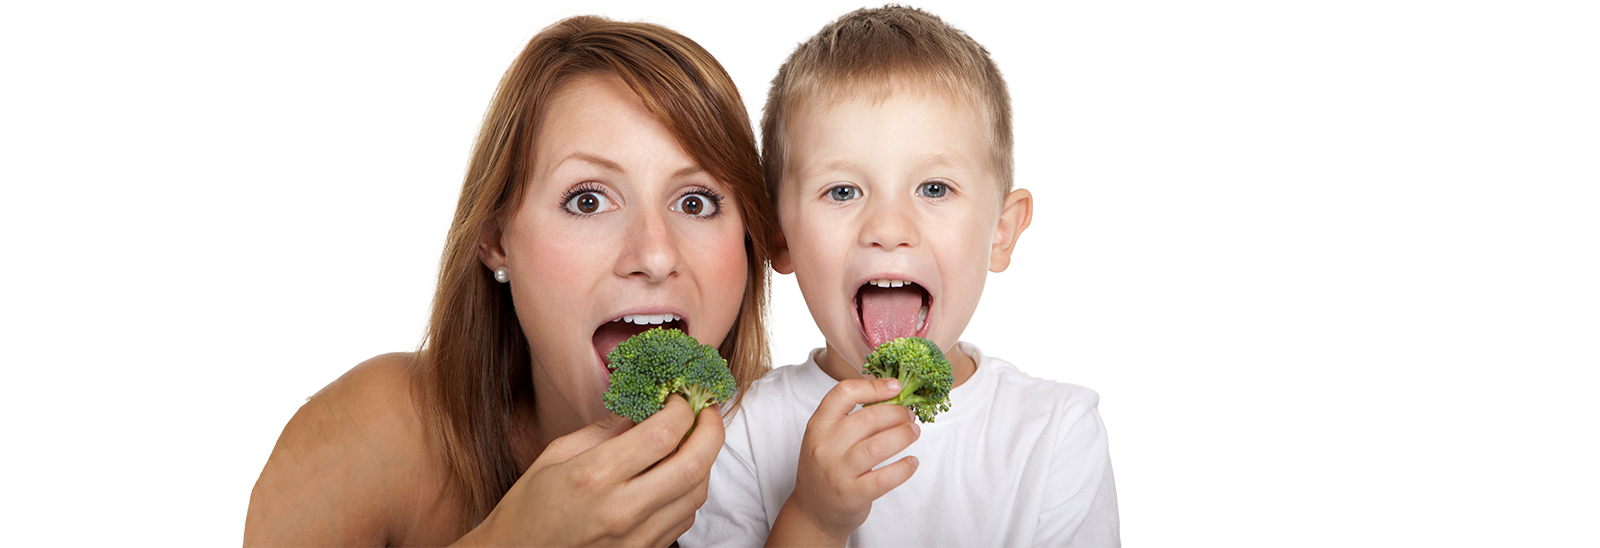 Picture of mother and son eating broccoli. 